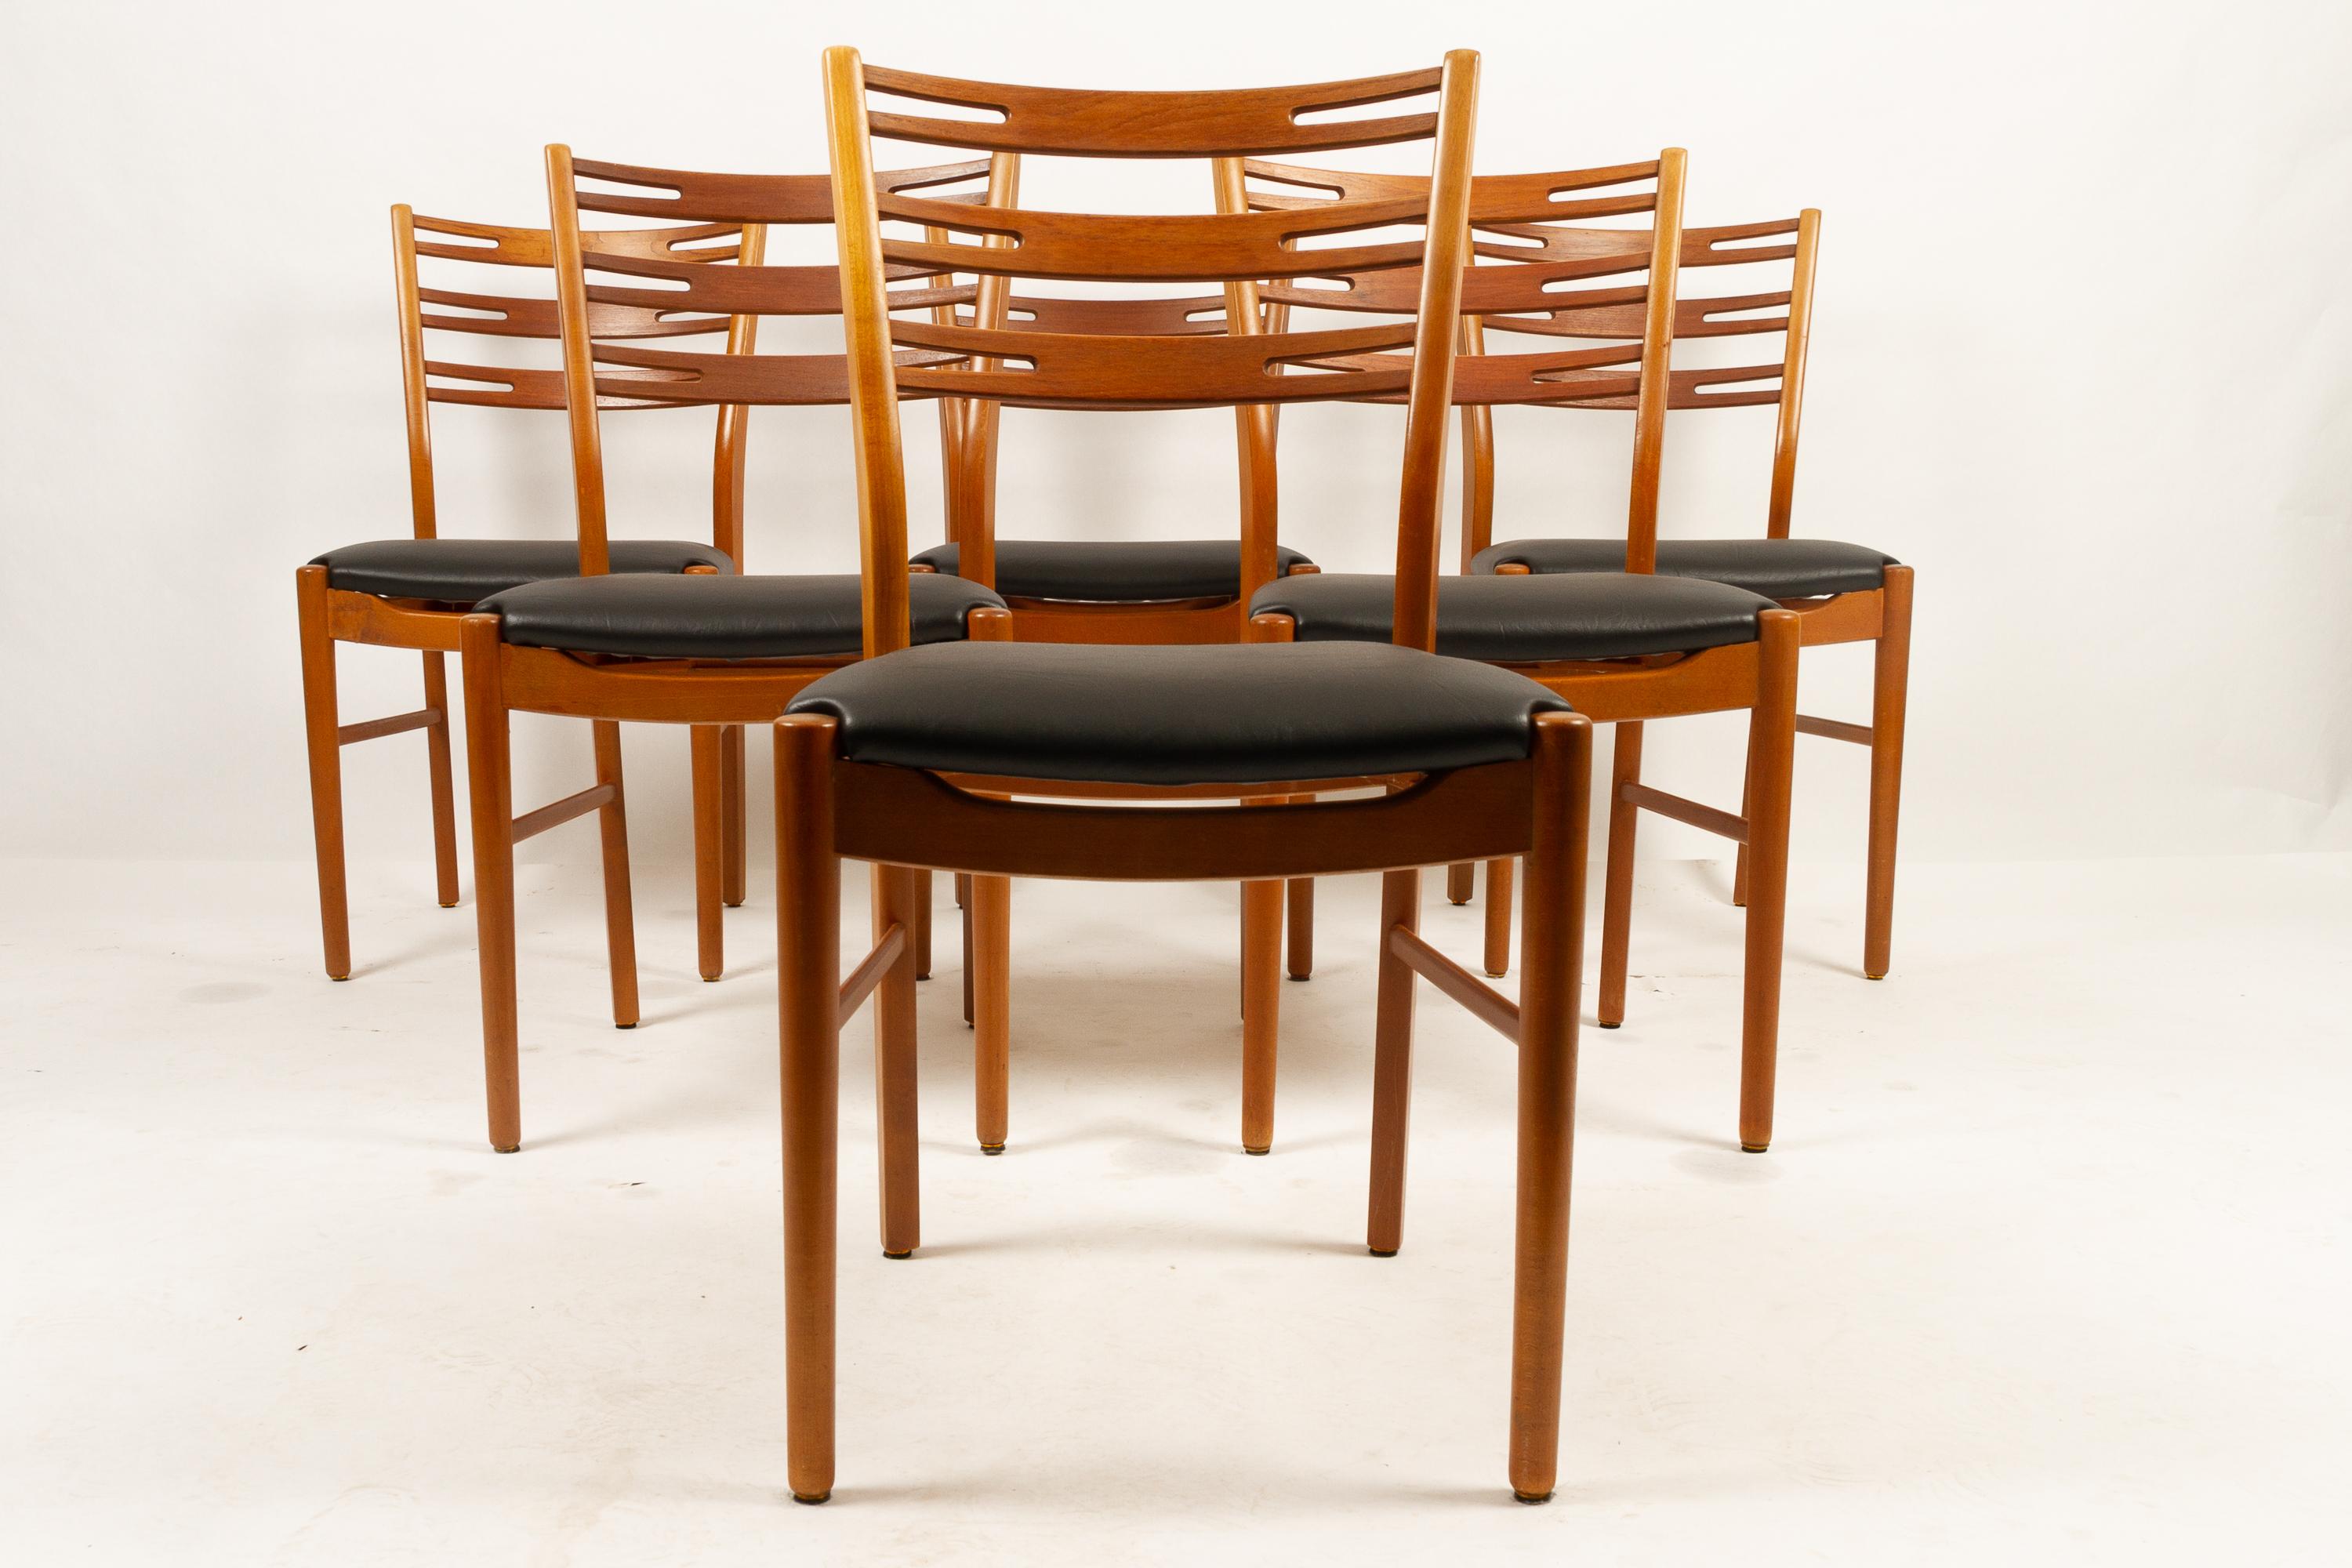 Vintage Farstrup chairs in teak and beech, set of 6.
Set of vintage Danish dining chairs. Backrests in teak veneer, frame in solid stained beech. Classic Mid-Century Modern Scandinavian chairs. Tall back and round tapered legs. Very comfortable and